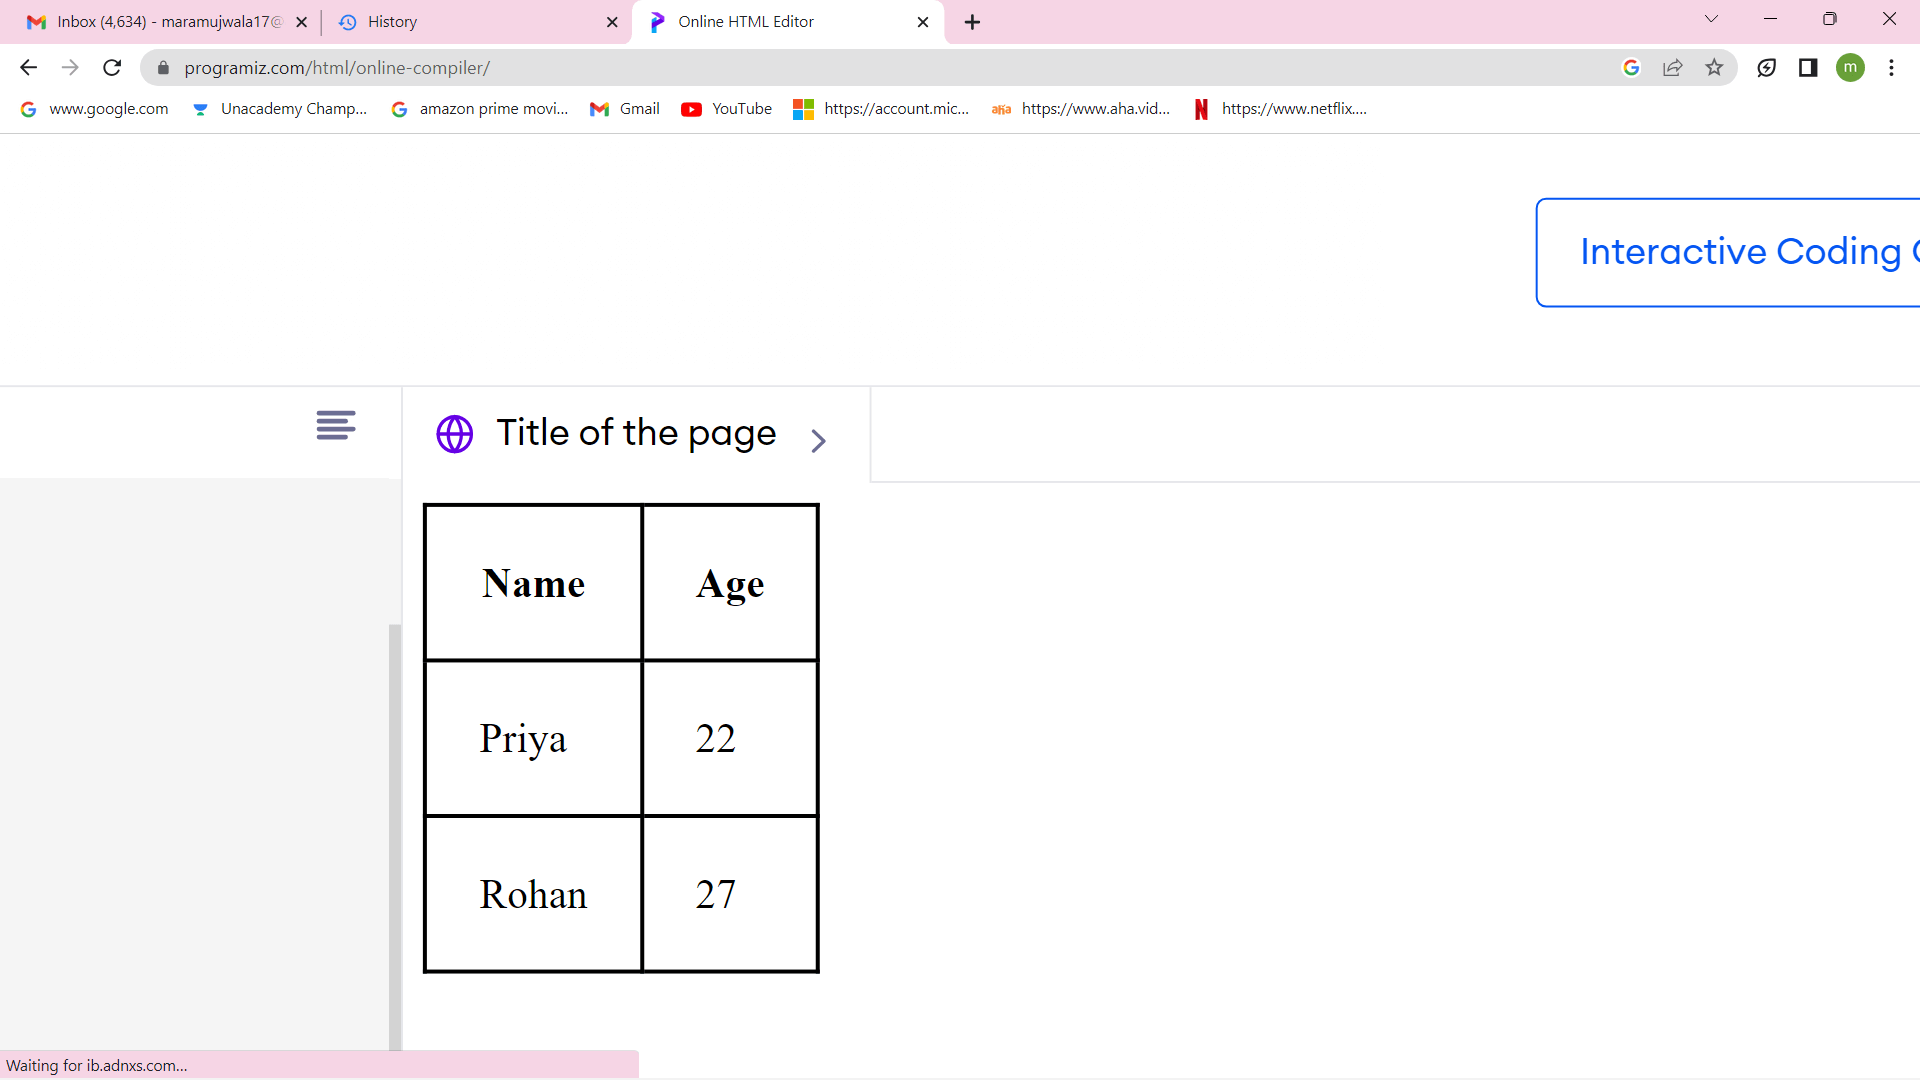 How to Make an HTML Table Border